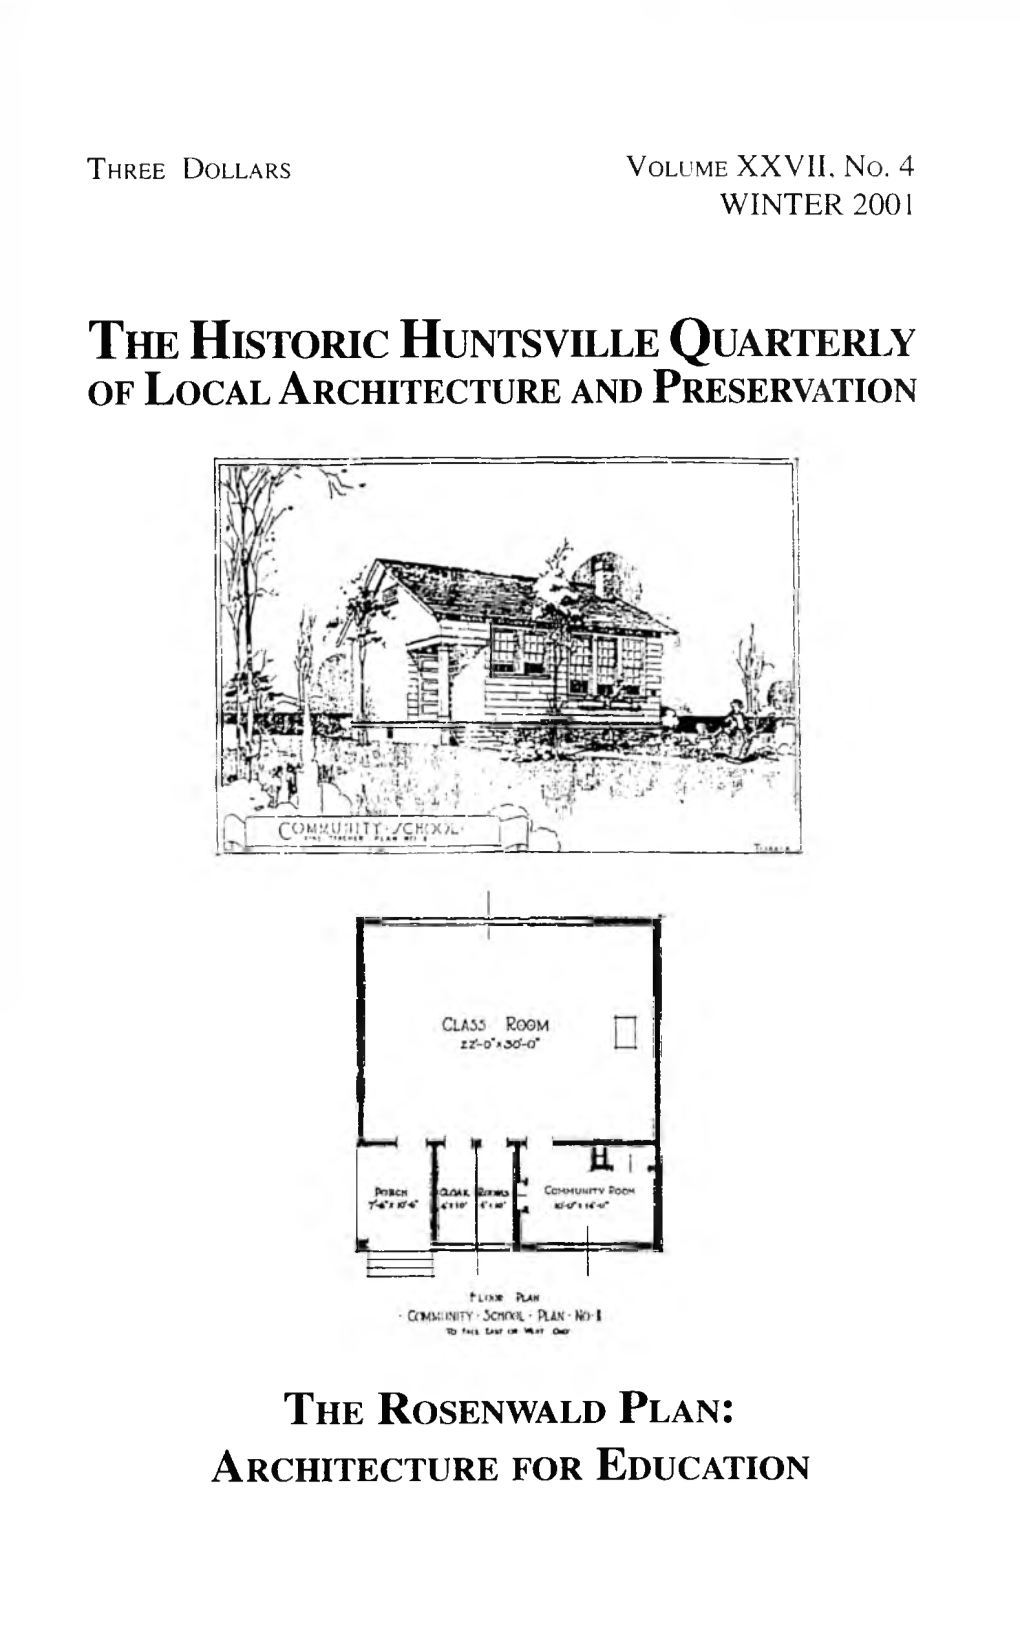 The Rosenwald Plan: Architecture for Education Nancy Rohr